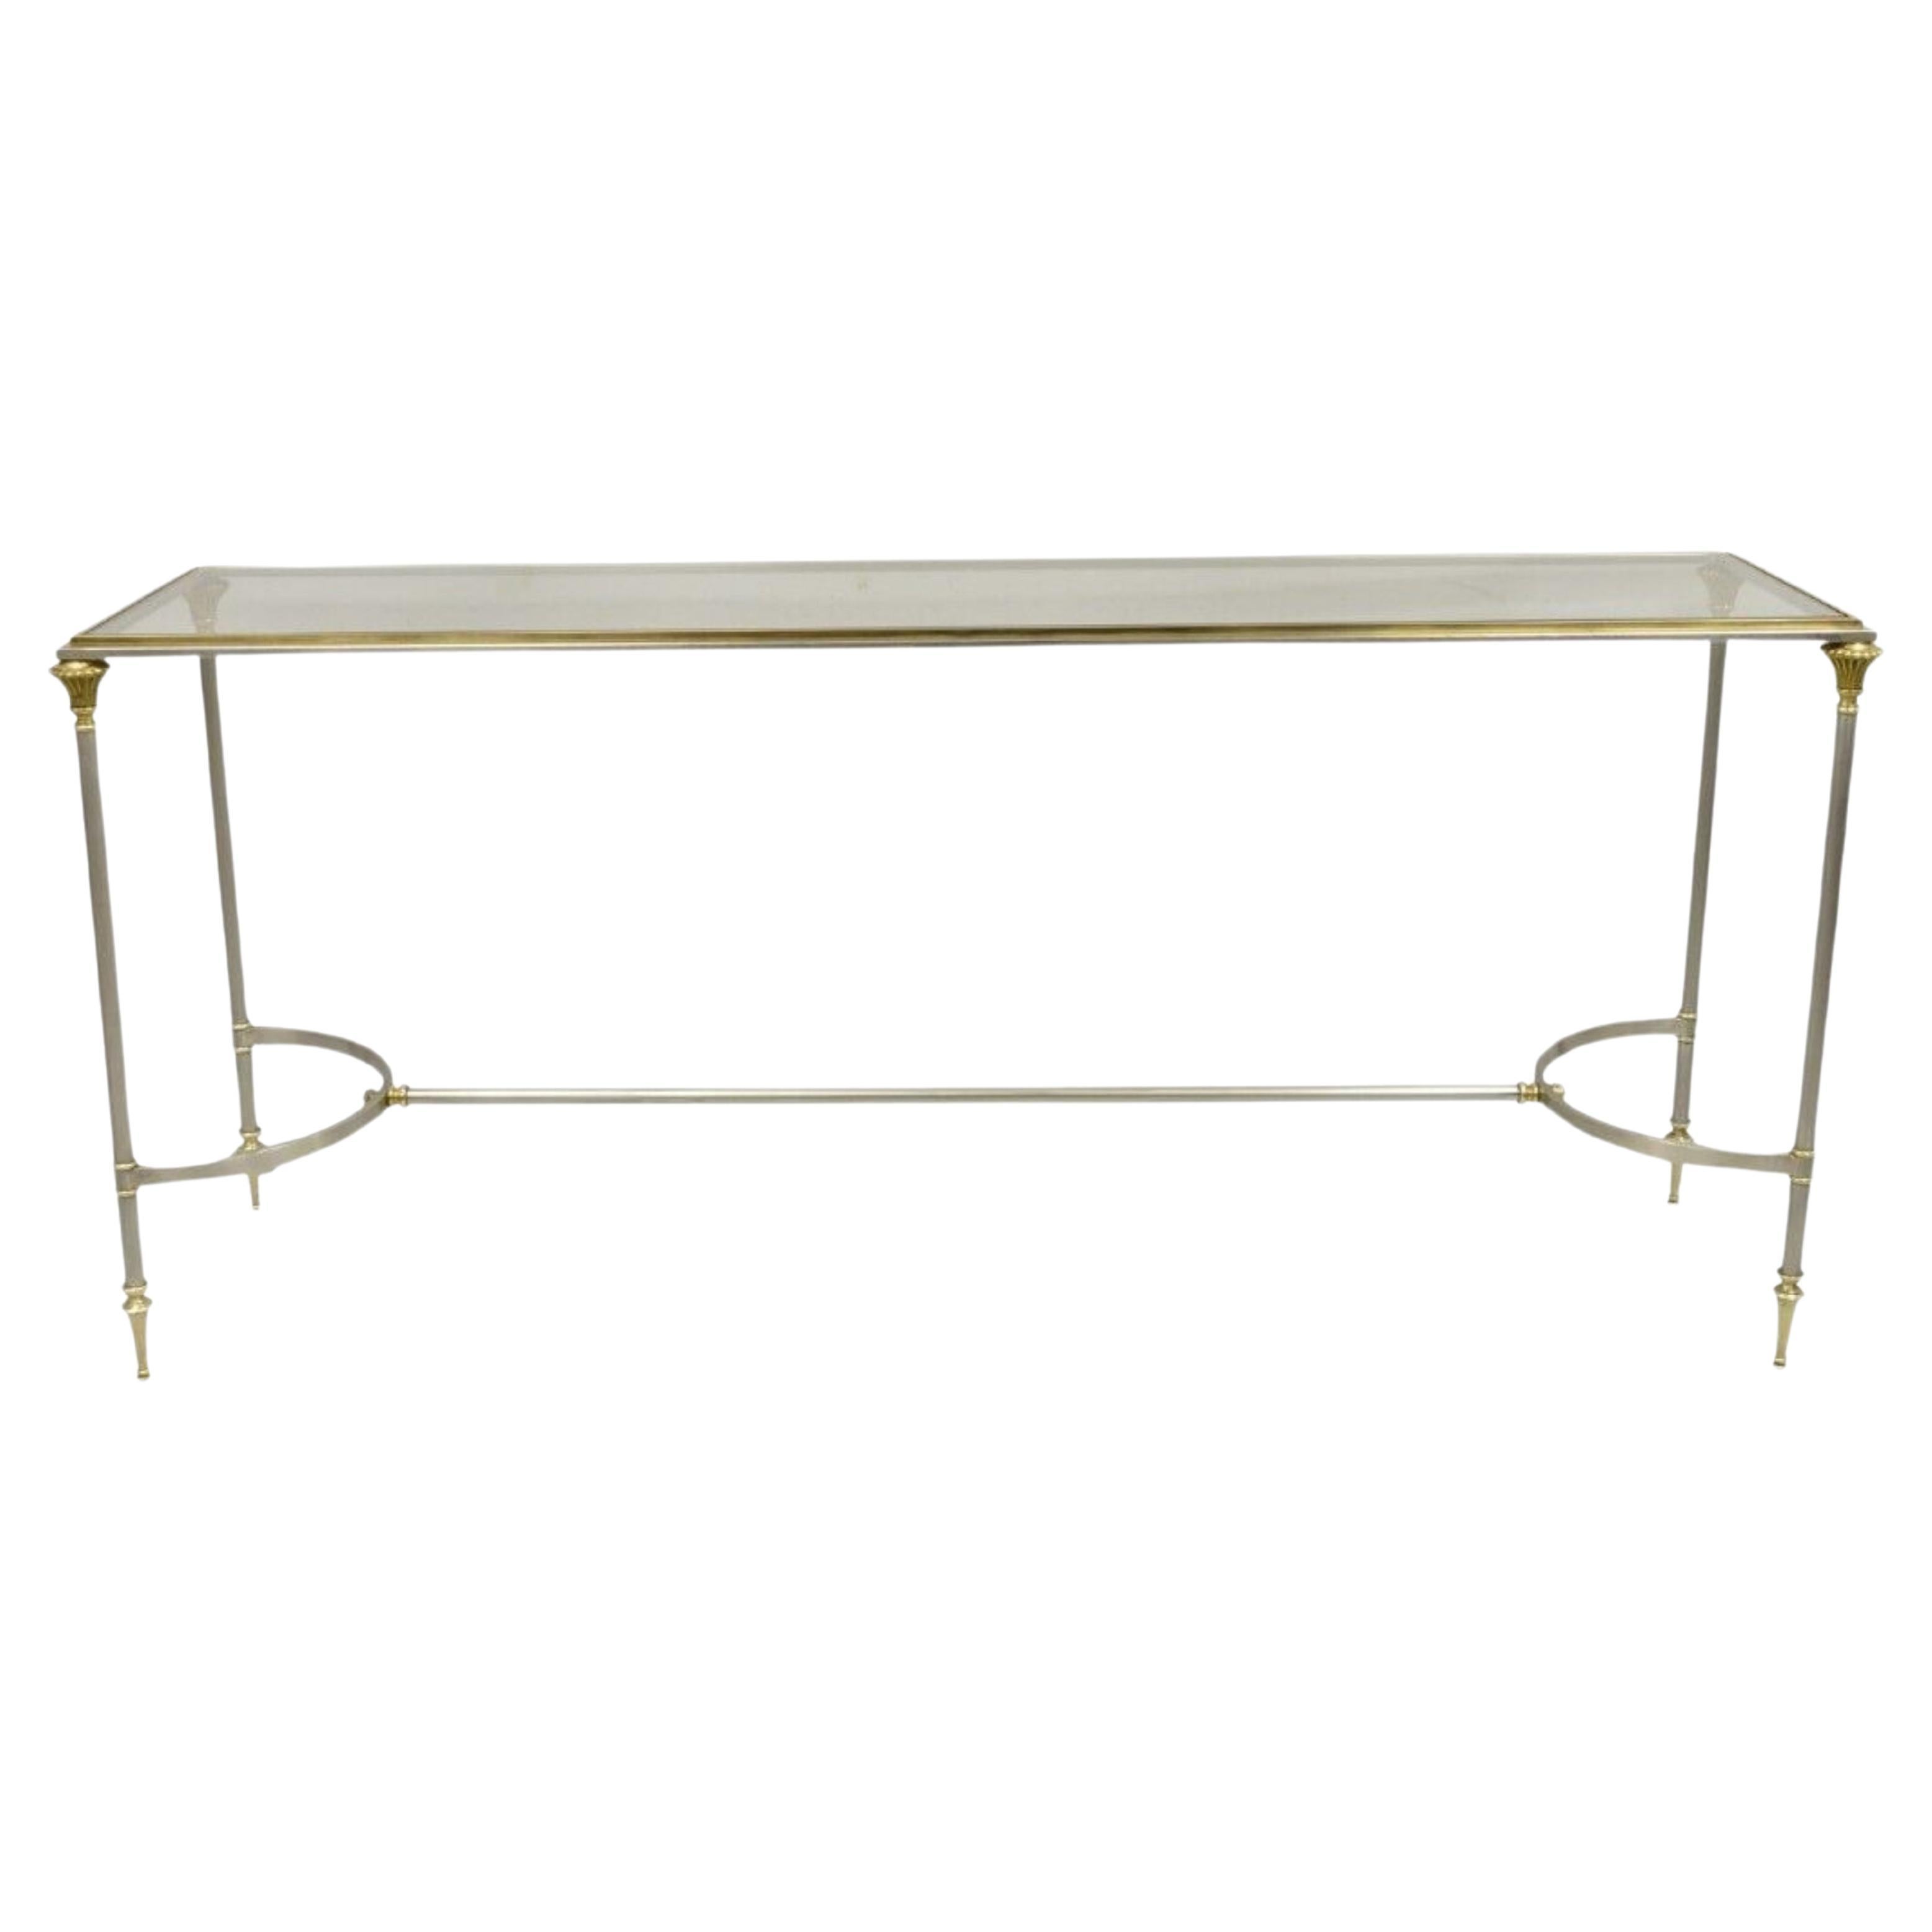 Maison Jansen Style Steel and Brass Neoclassical Directoire Console Sofa Table For Sale